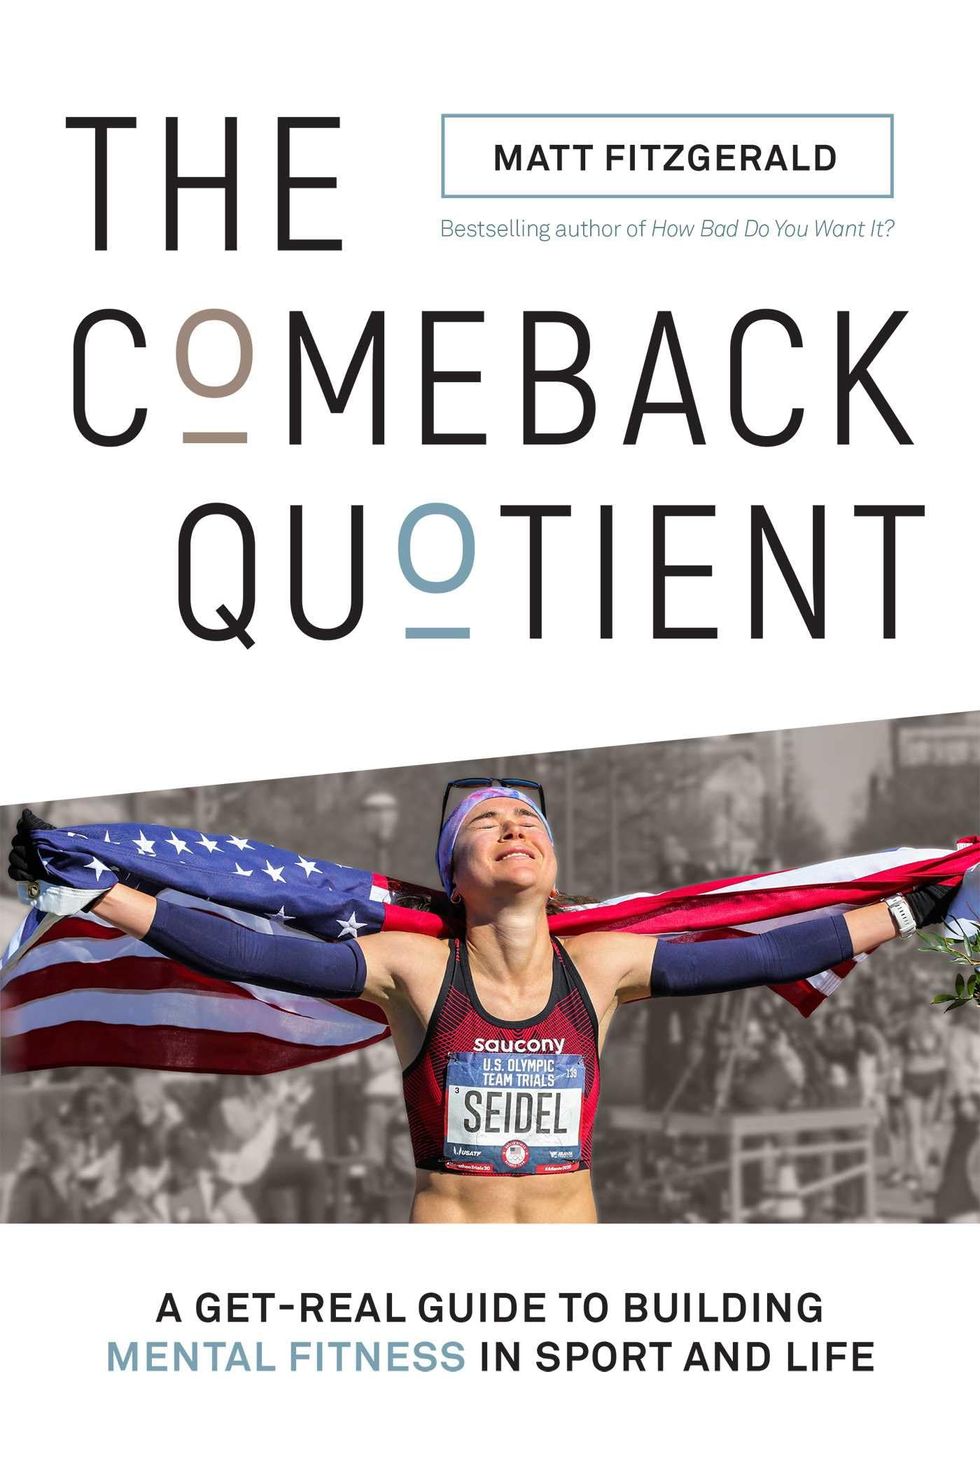 'The Comeback Quotient: A Get-Real Guide to Building Mental Fitness in Sport and Life' by Matt Fitzgerald